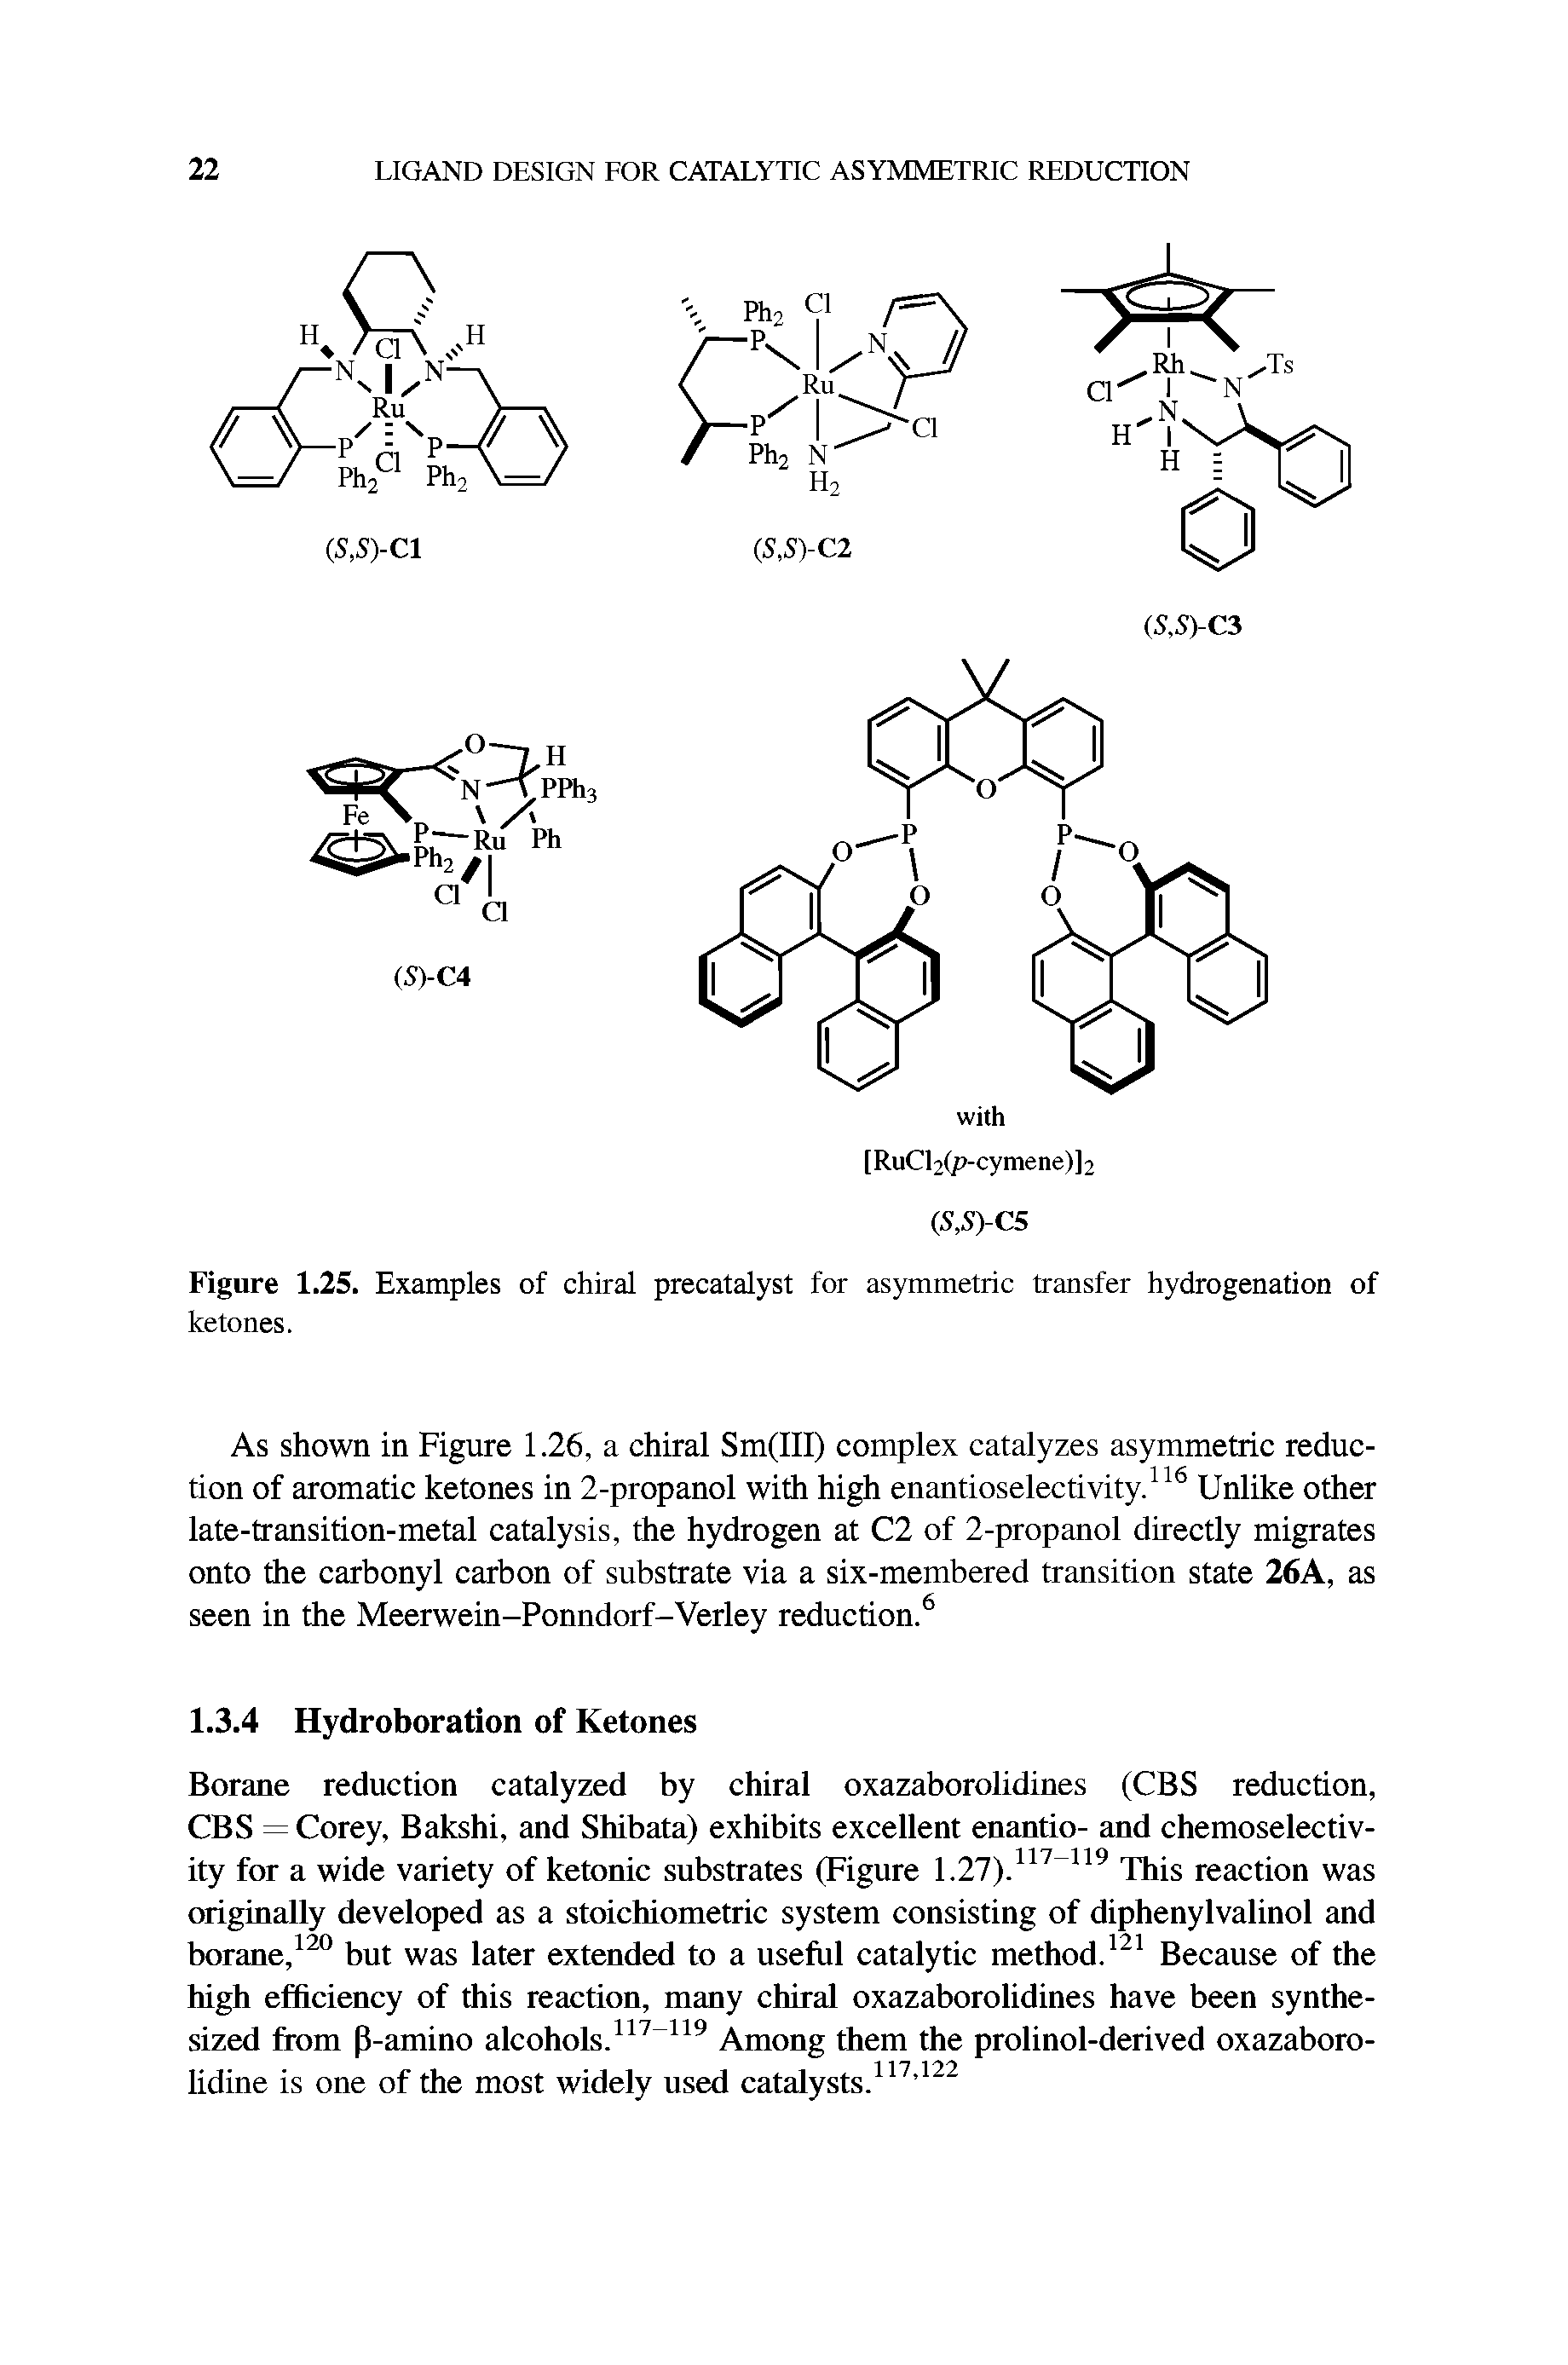 Figure 1.25. Examples of chiral precatalyst for asymmetric transfer hydrogenation of ketones.